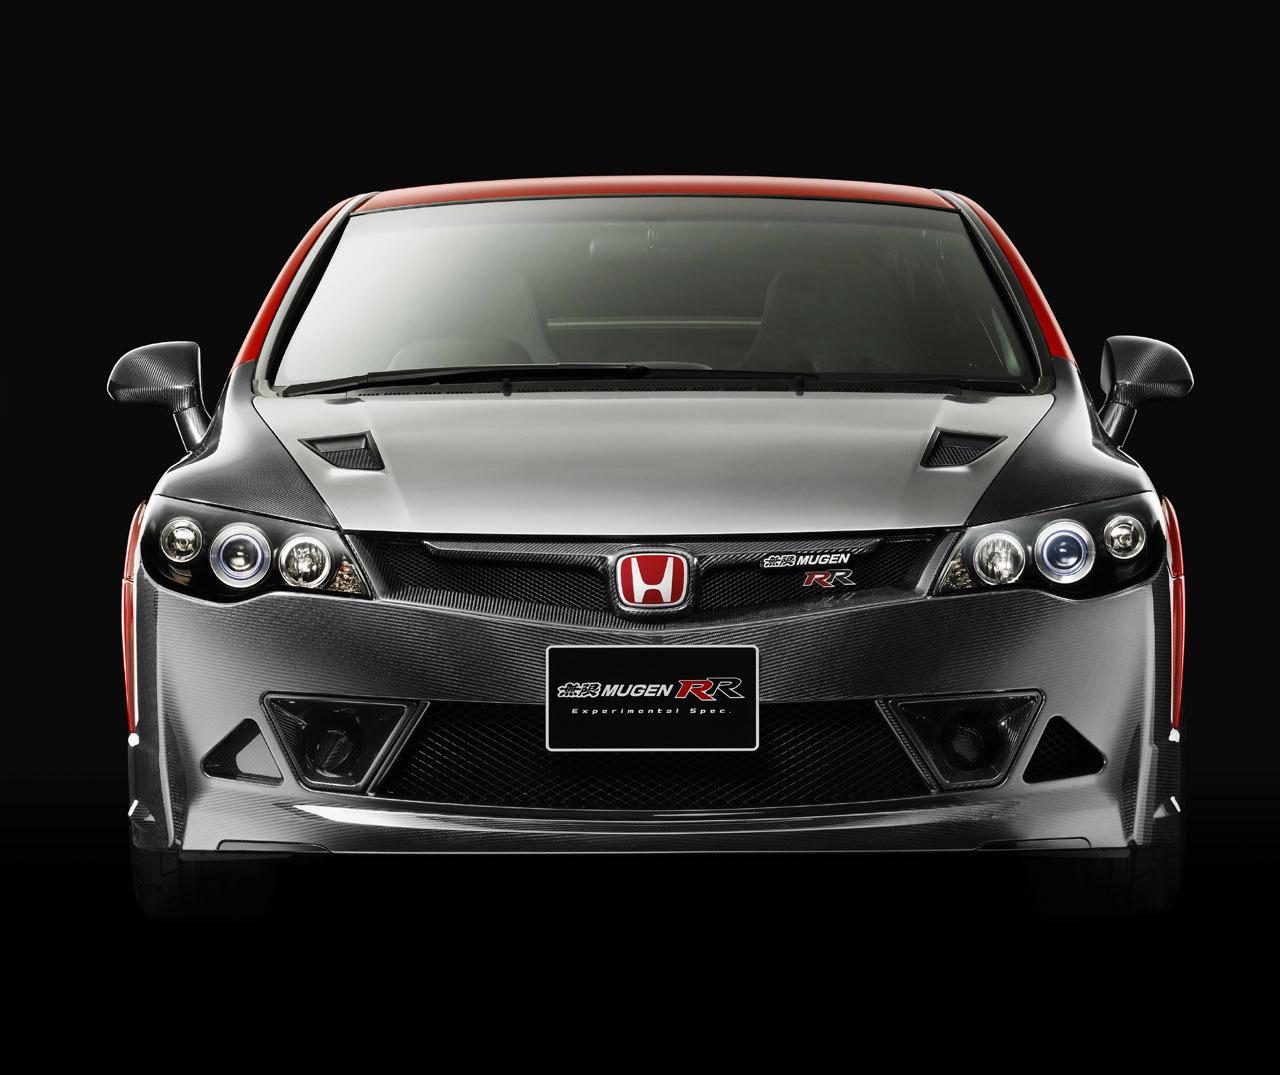 Mugen Civic TypeRR Experimental Spec Wallpaper and Image Gallery